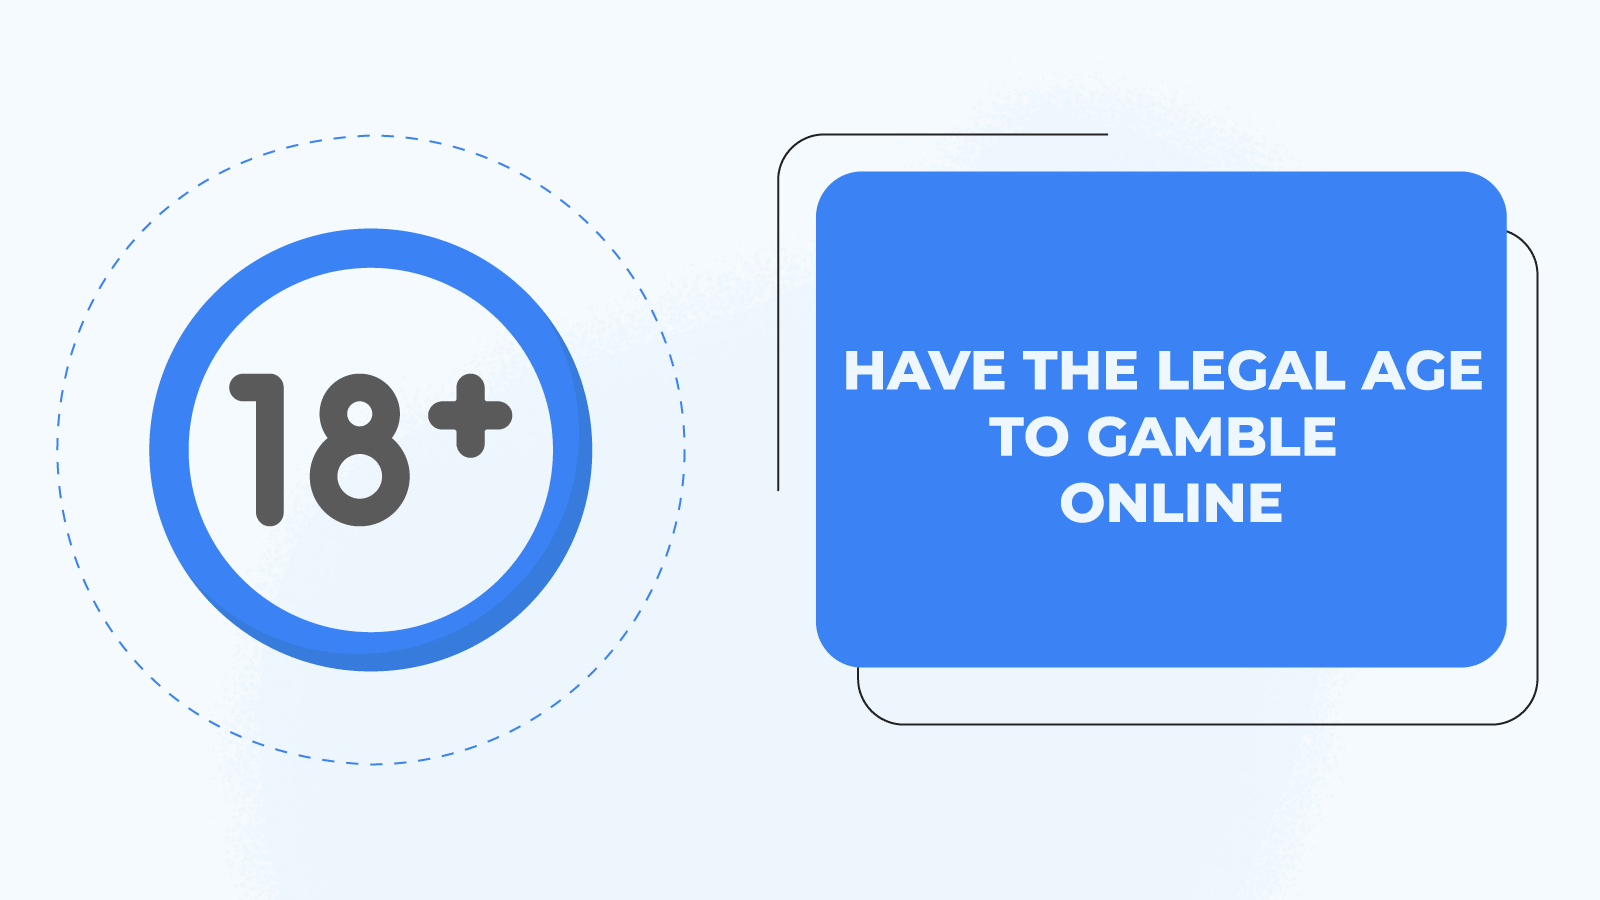 Have the legal age to gamble online